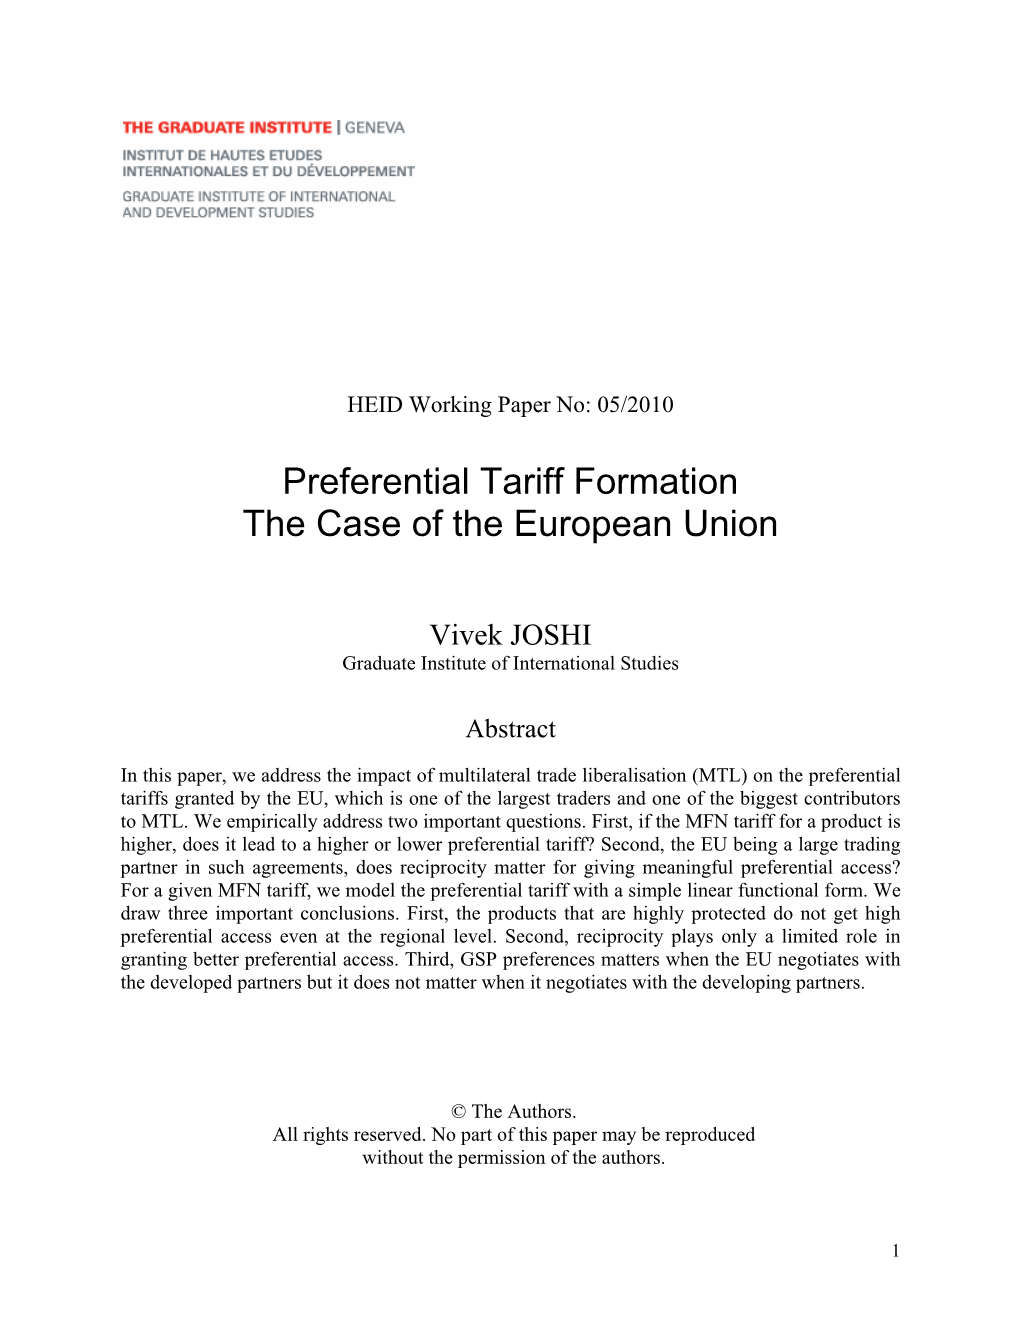 Preferential Tariff Formation the Case of the European Union